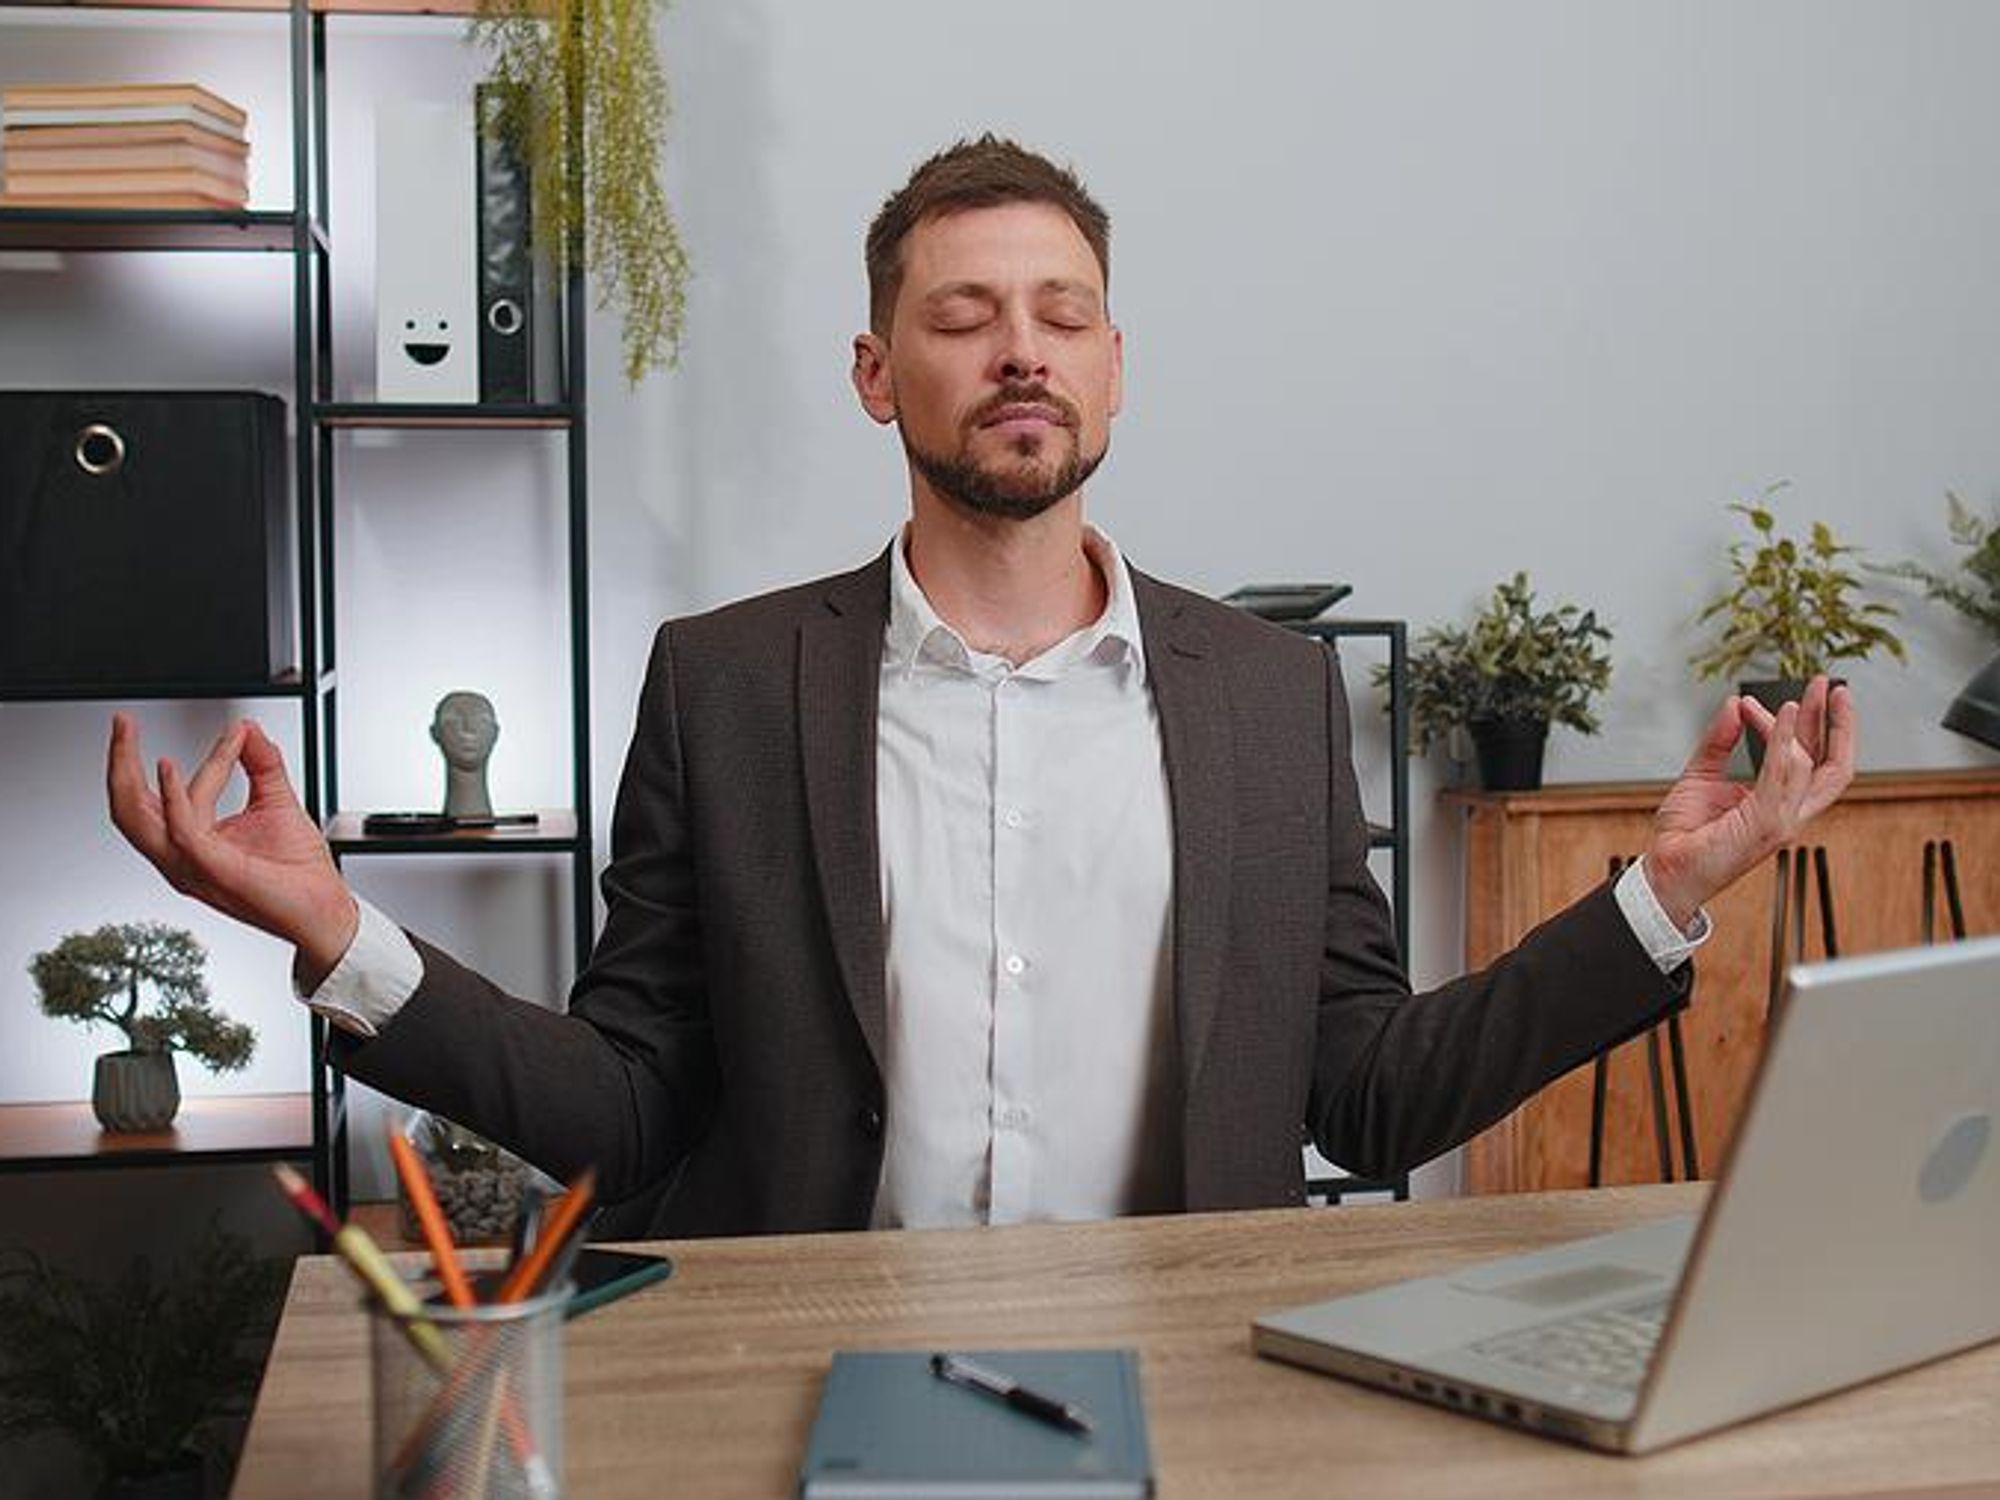 Man meditates, takes a breath, to stay mindful and present at work